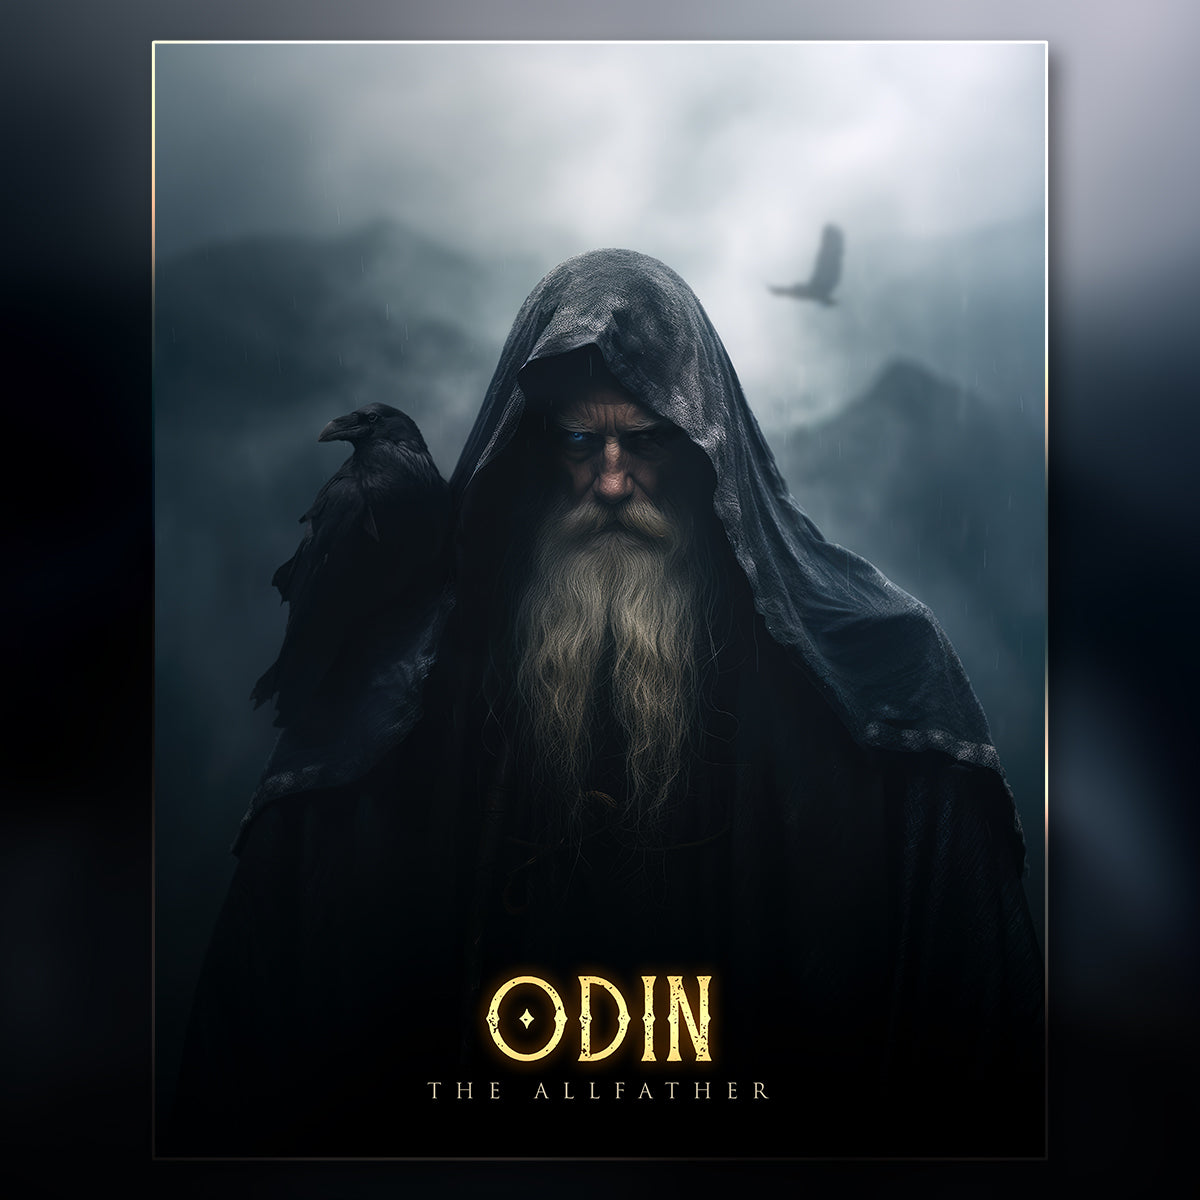 Odin, The Allfather artwork done by Aethyrien